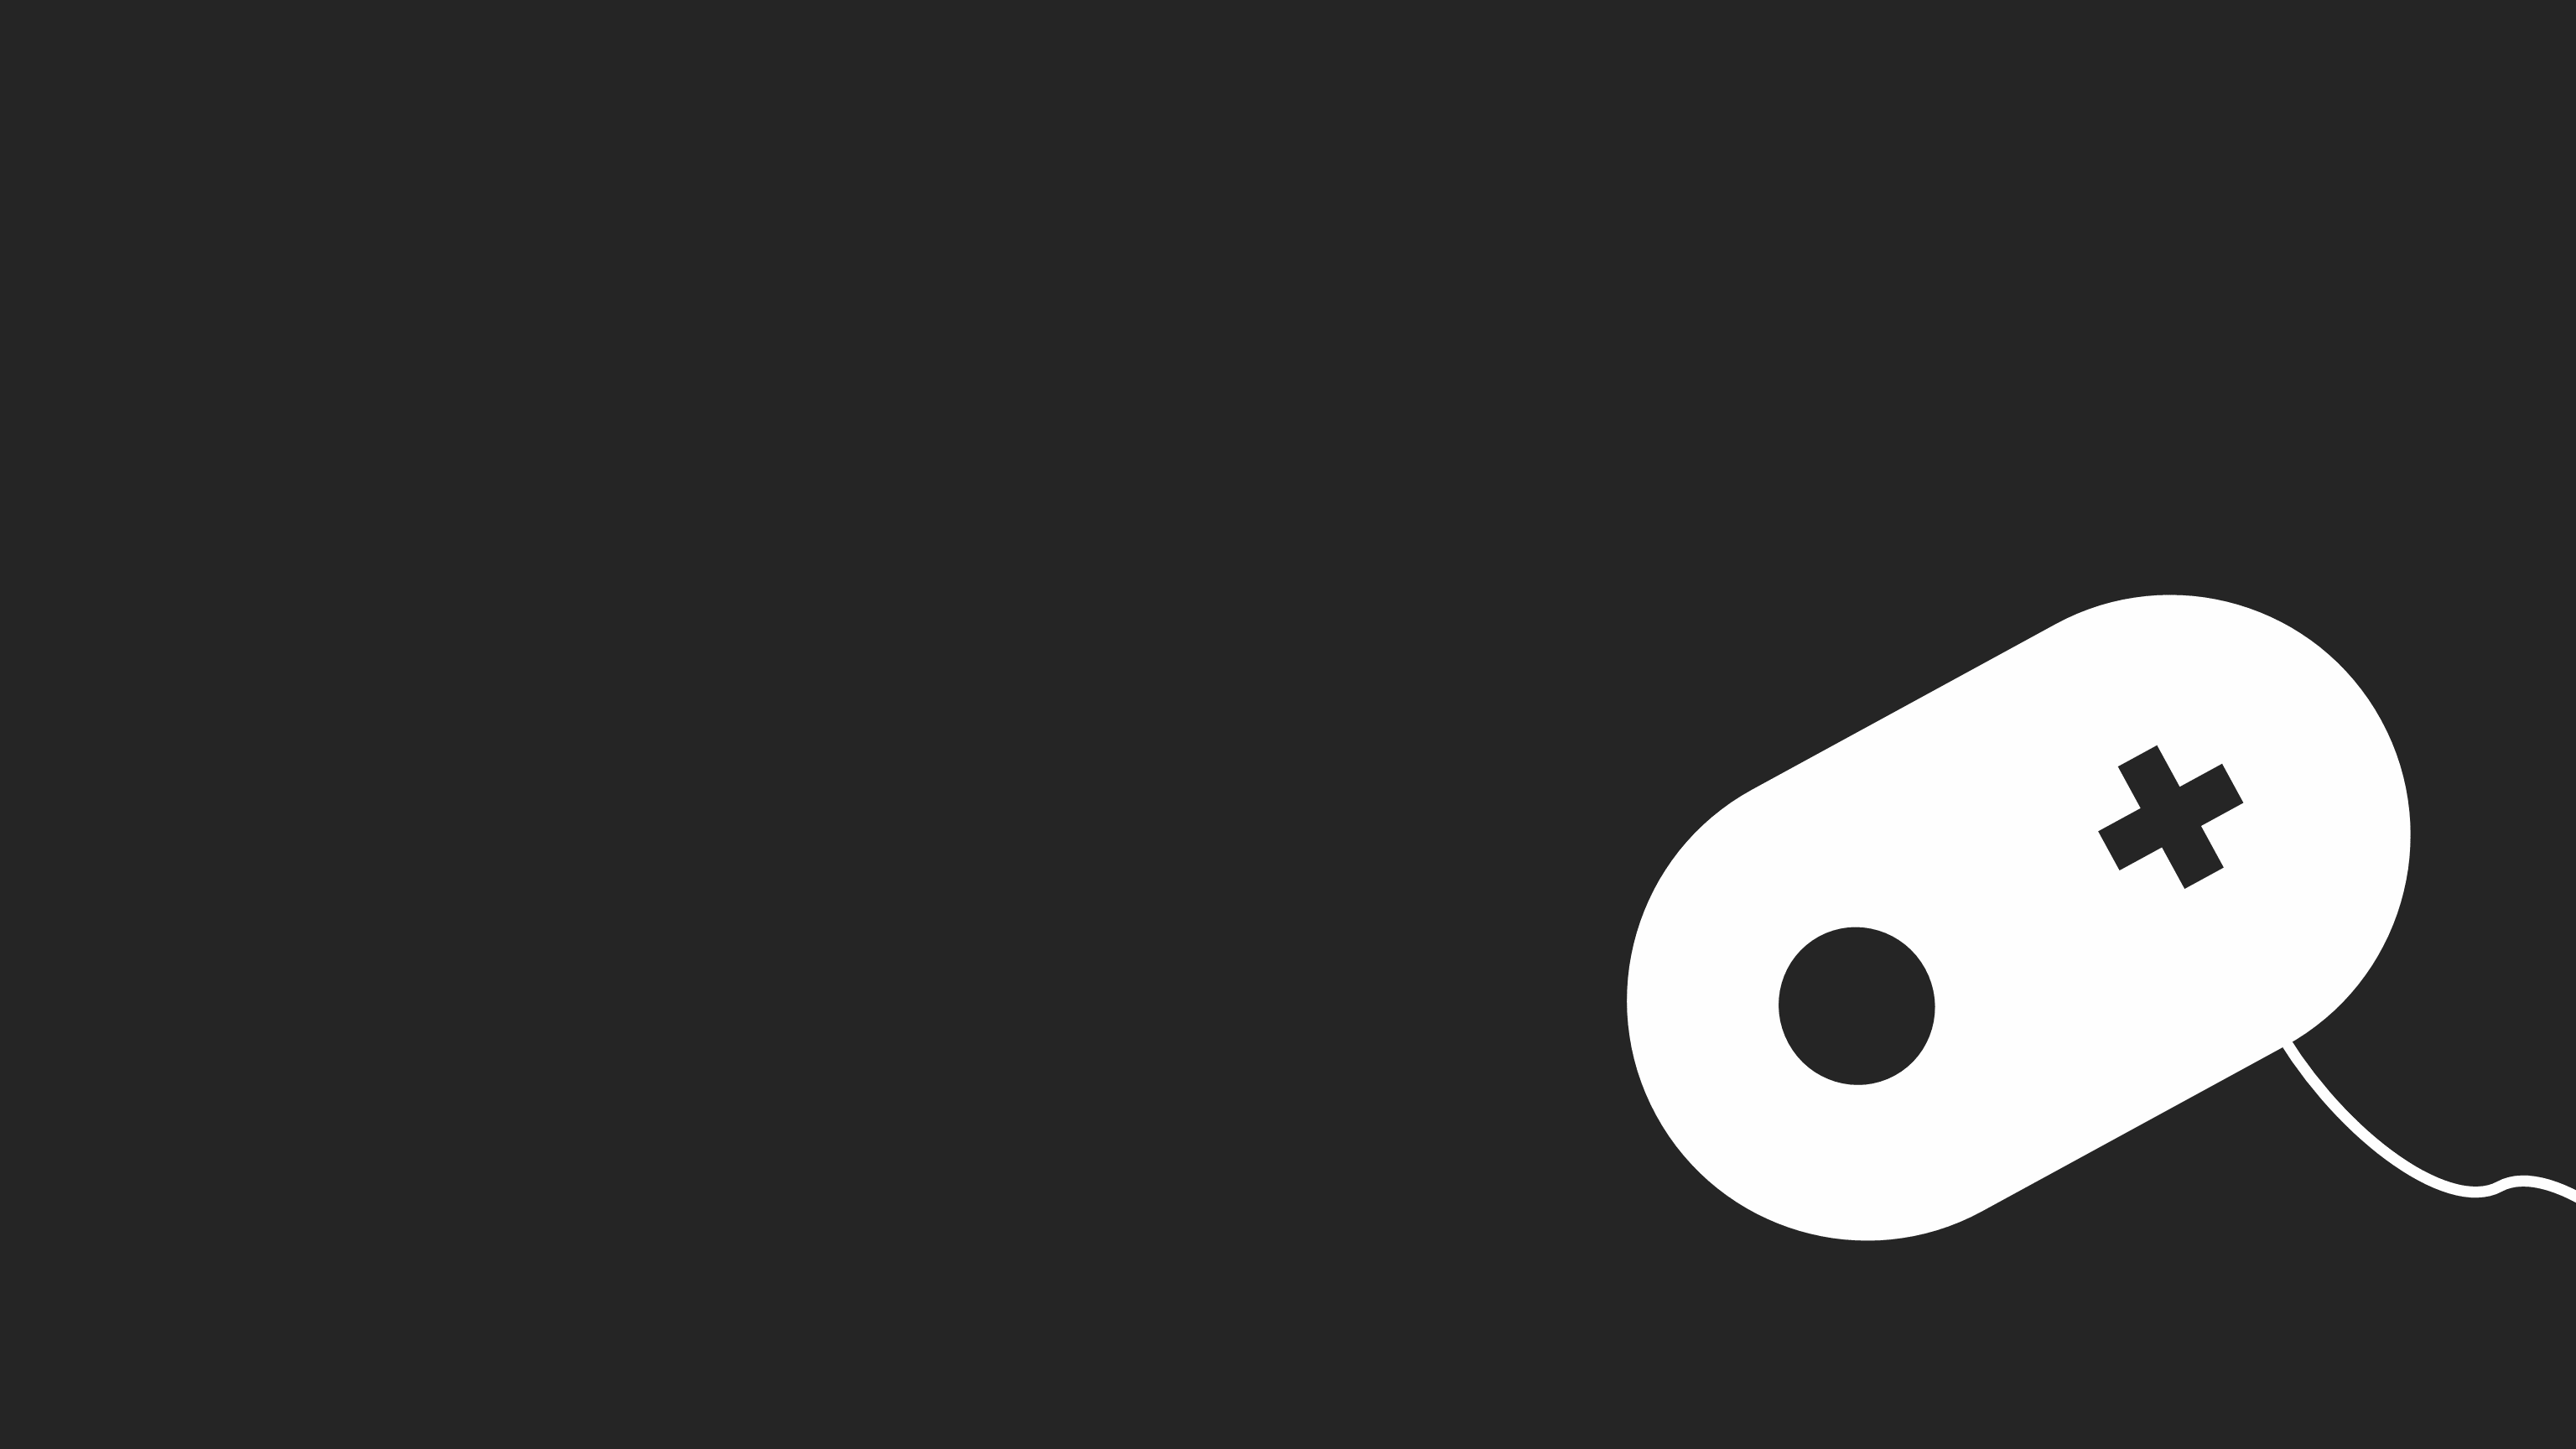 Wallpaper / minimalism, simple, controllers, video game art, simple background, video games, monochrome free download